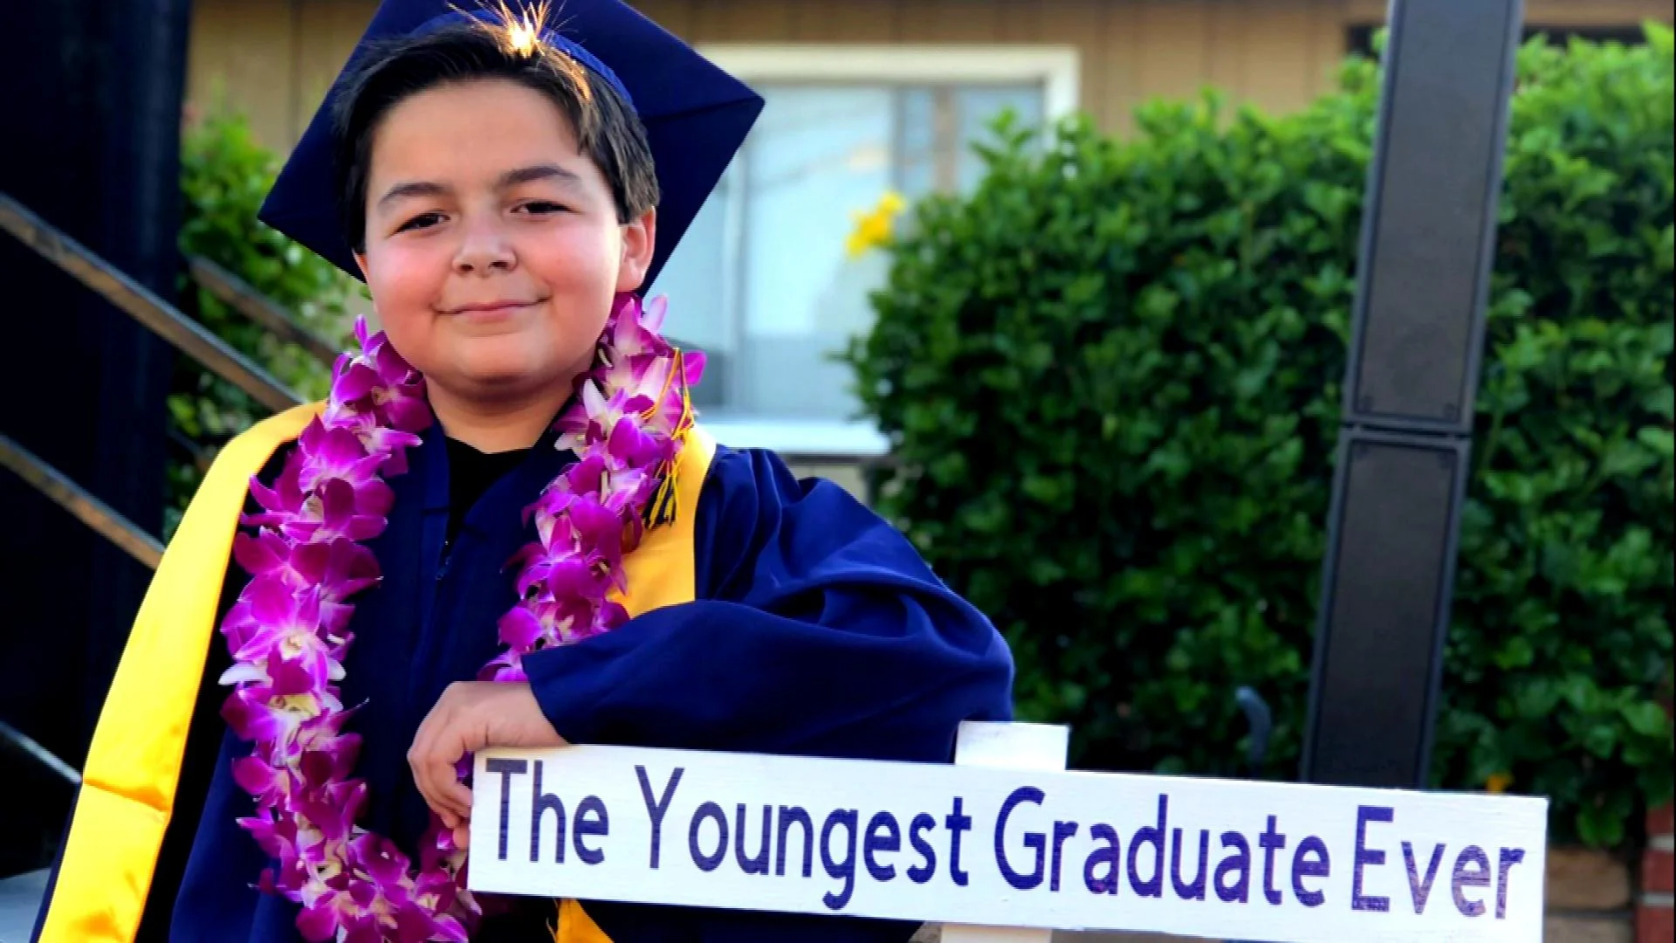 13-Year-Old Finishes College With 4 Degrees, Becoming Youngest Student To Ever Graduate There